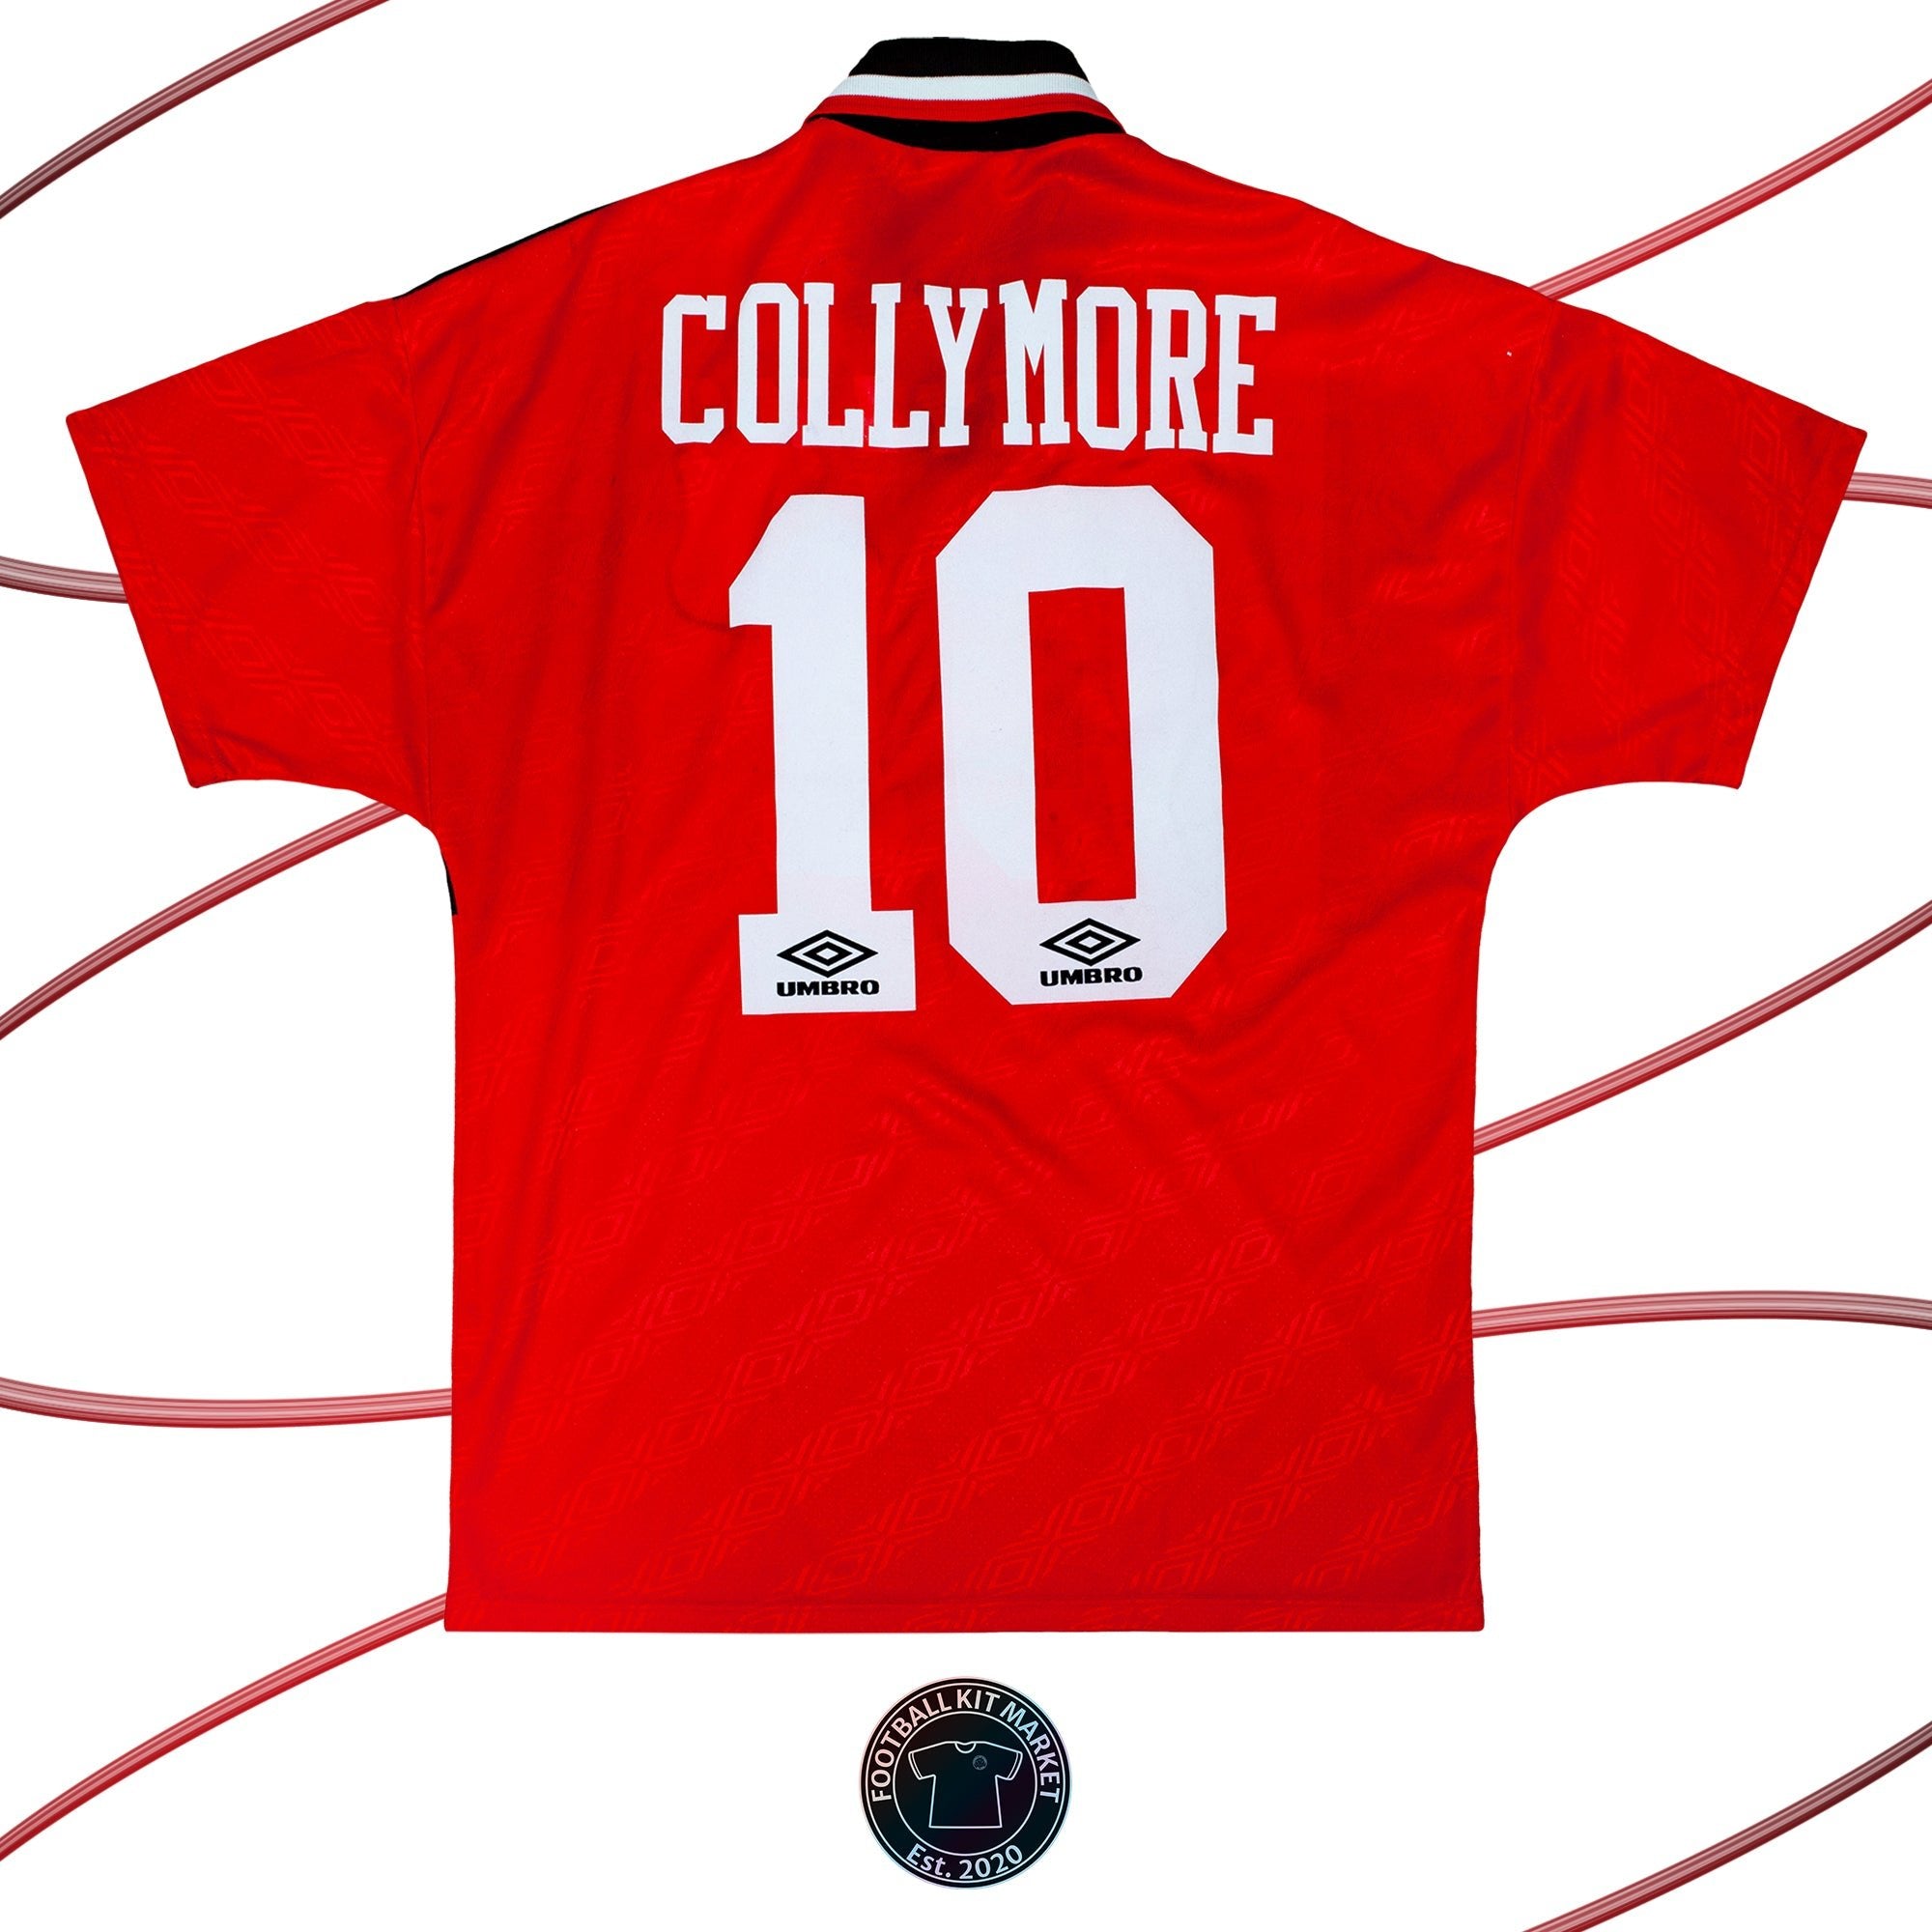 Genuine NOTTINGHAM FOREST Home COLLYMORE (1994-1996) - UMBRO (L) - Product Image from Football Kit Market